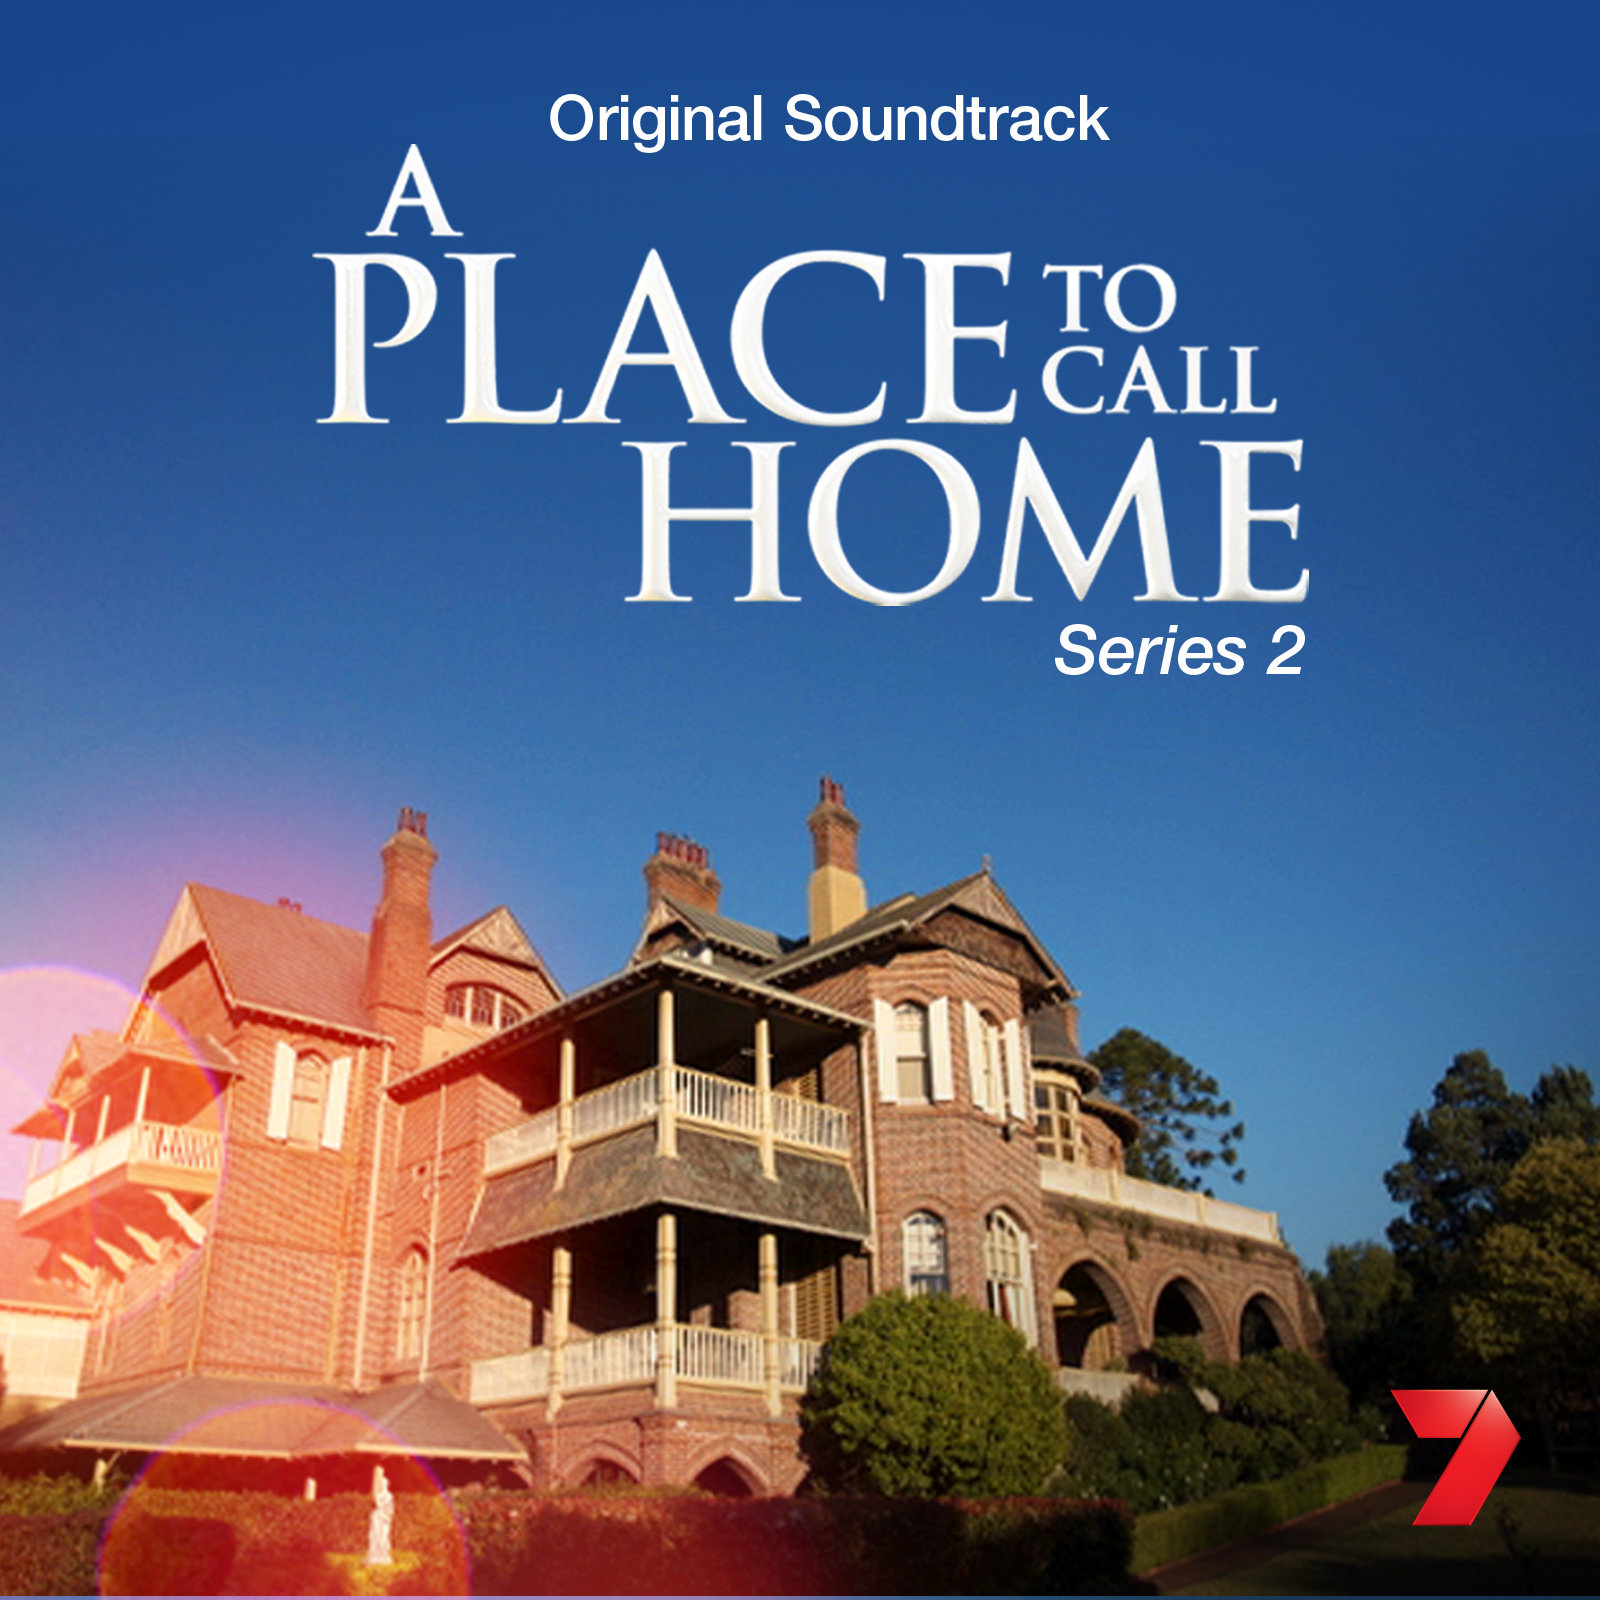 The Home Soundtrack. A place to Call Home. The place i Called Home. Home Official Soundtrack. Home soundtrack